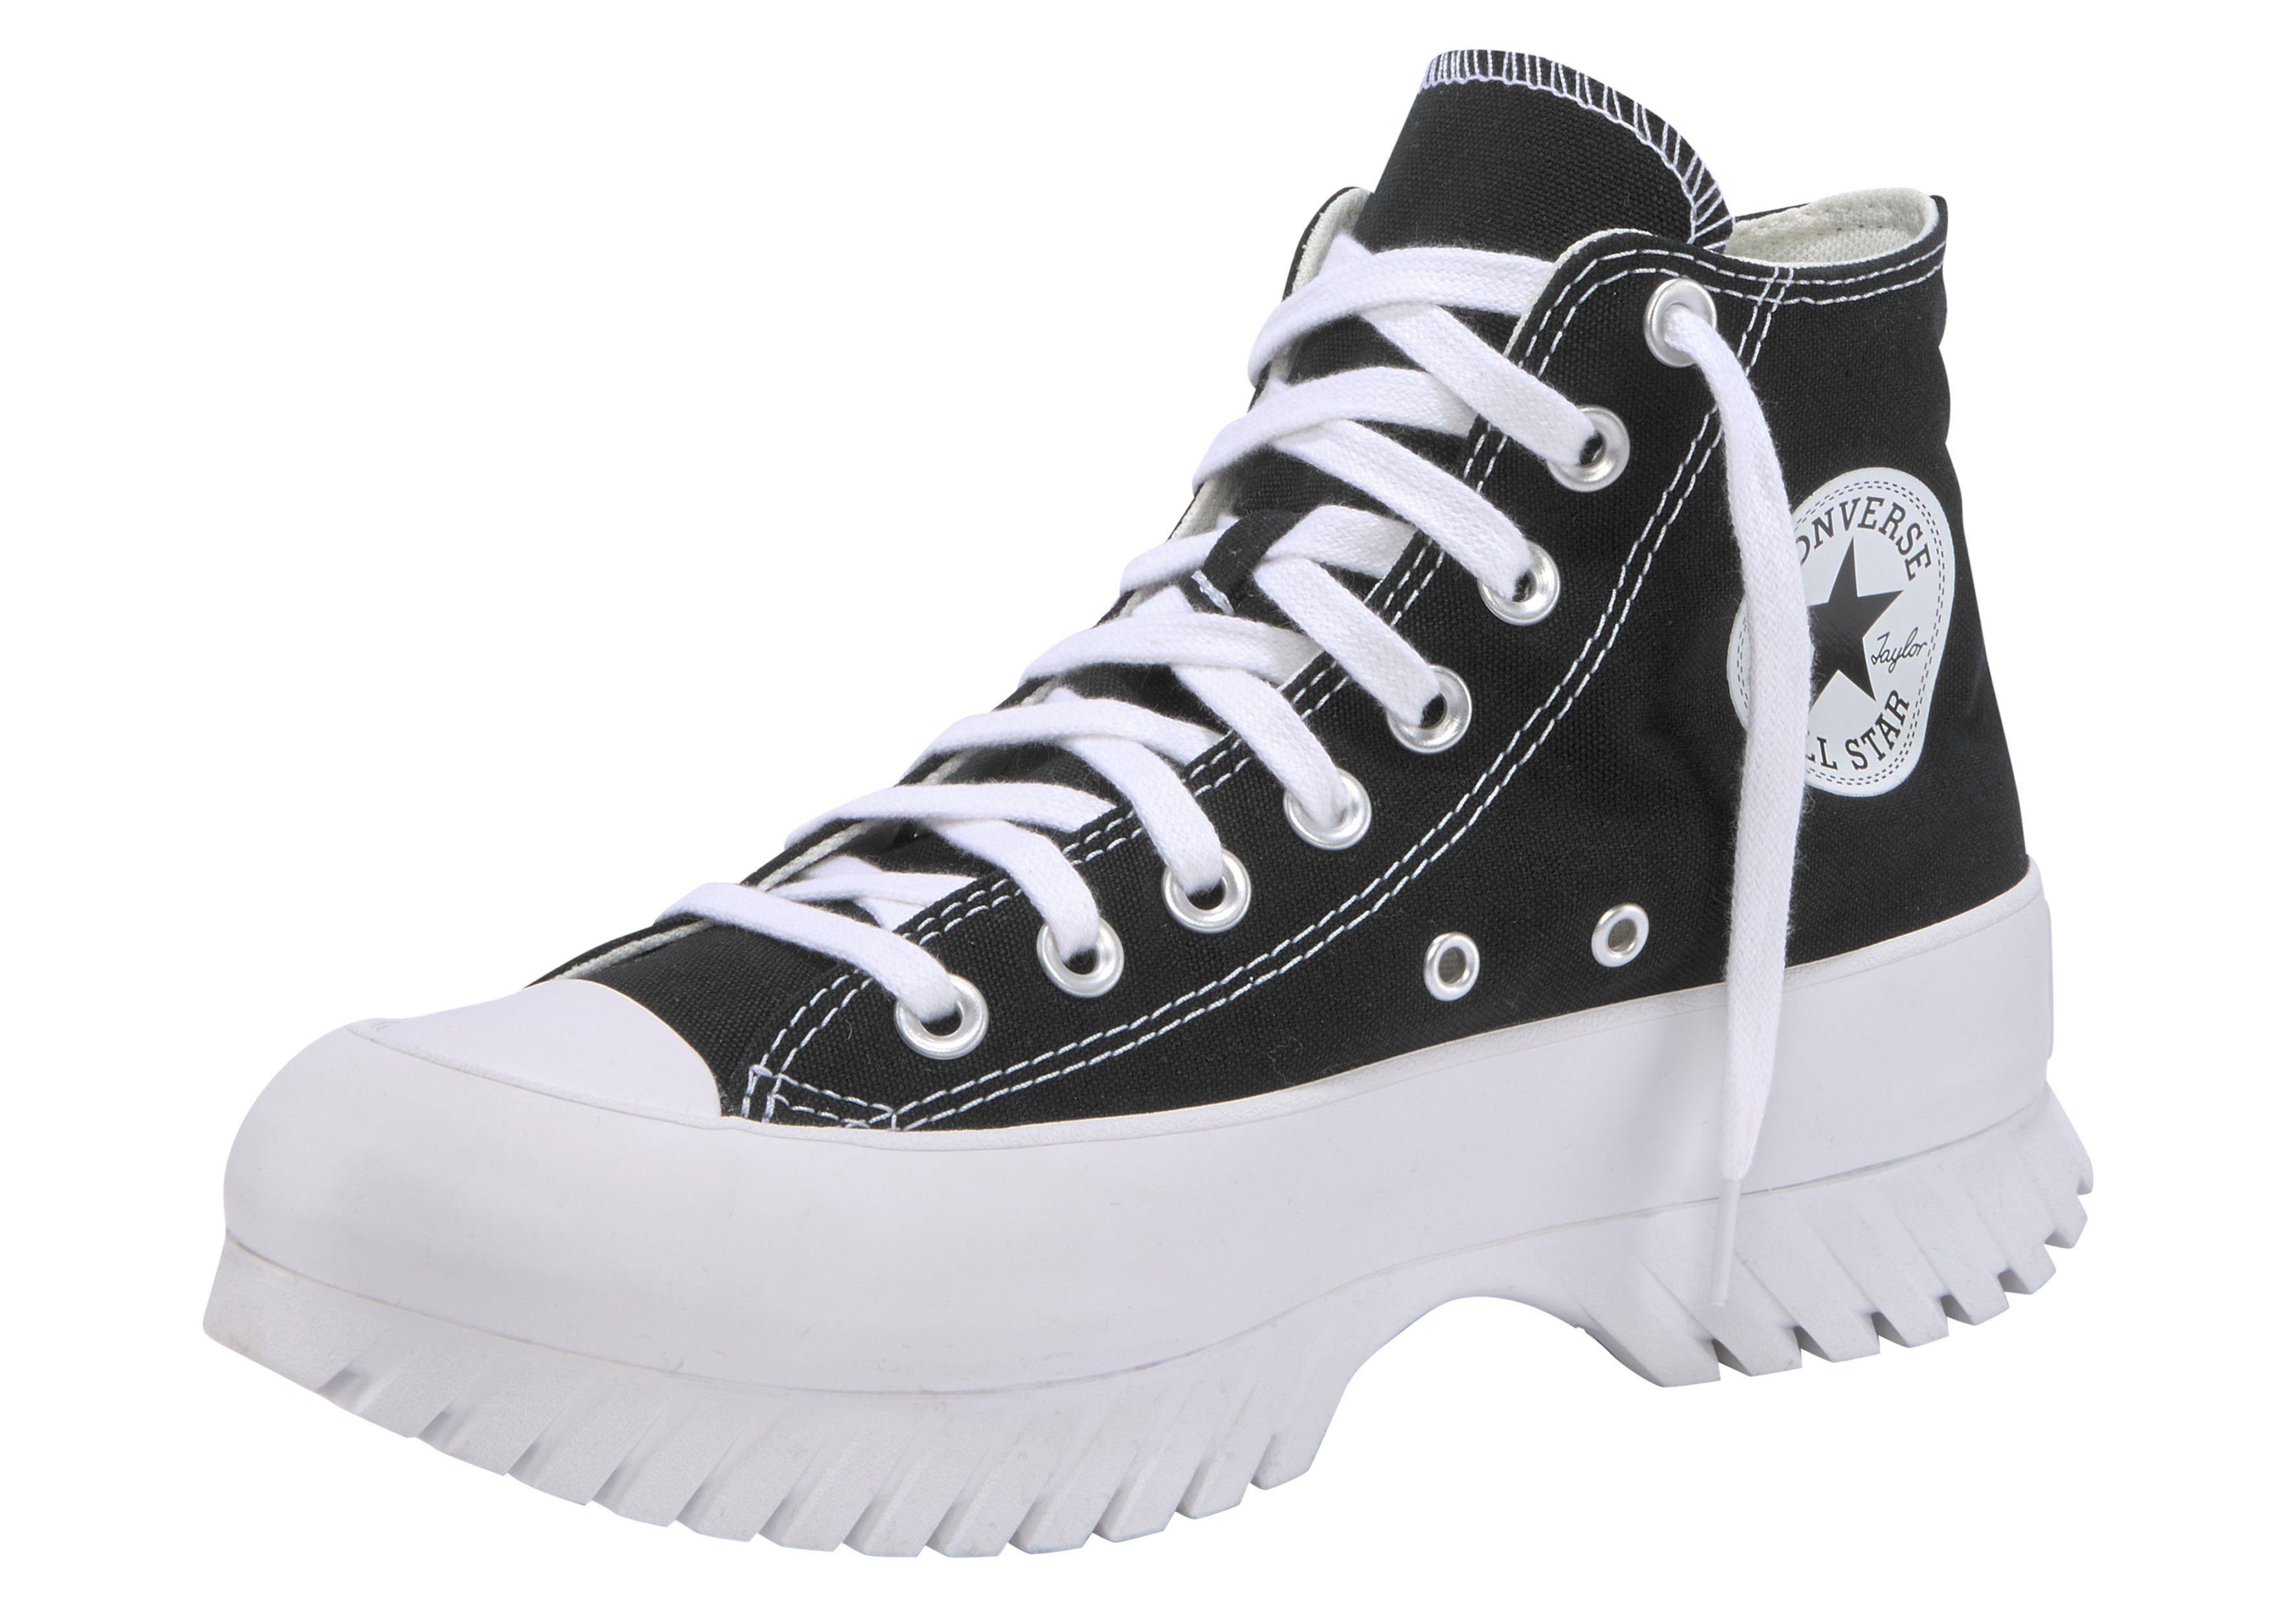 Converse »CHUCK TAYLOR ALL STAR LUGGED 2.0 HI« Plateausneaker online kaufen  | OTTO